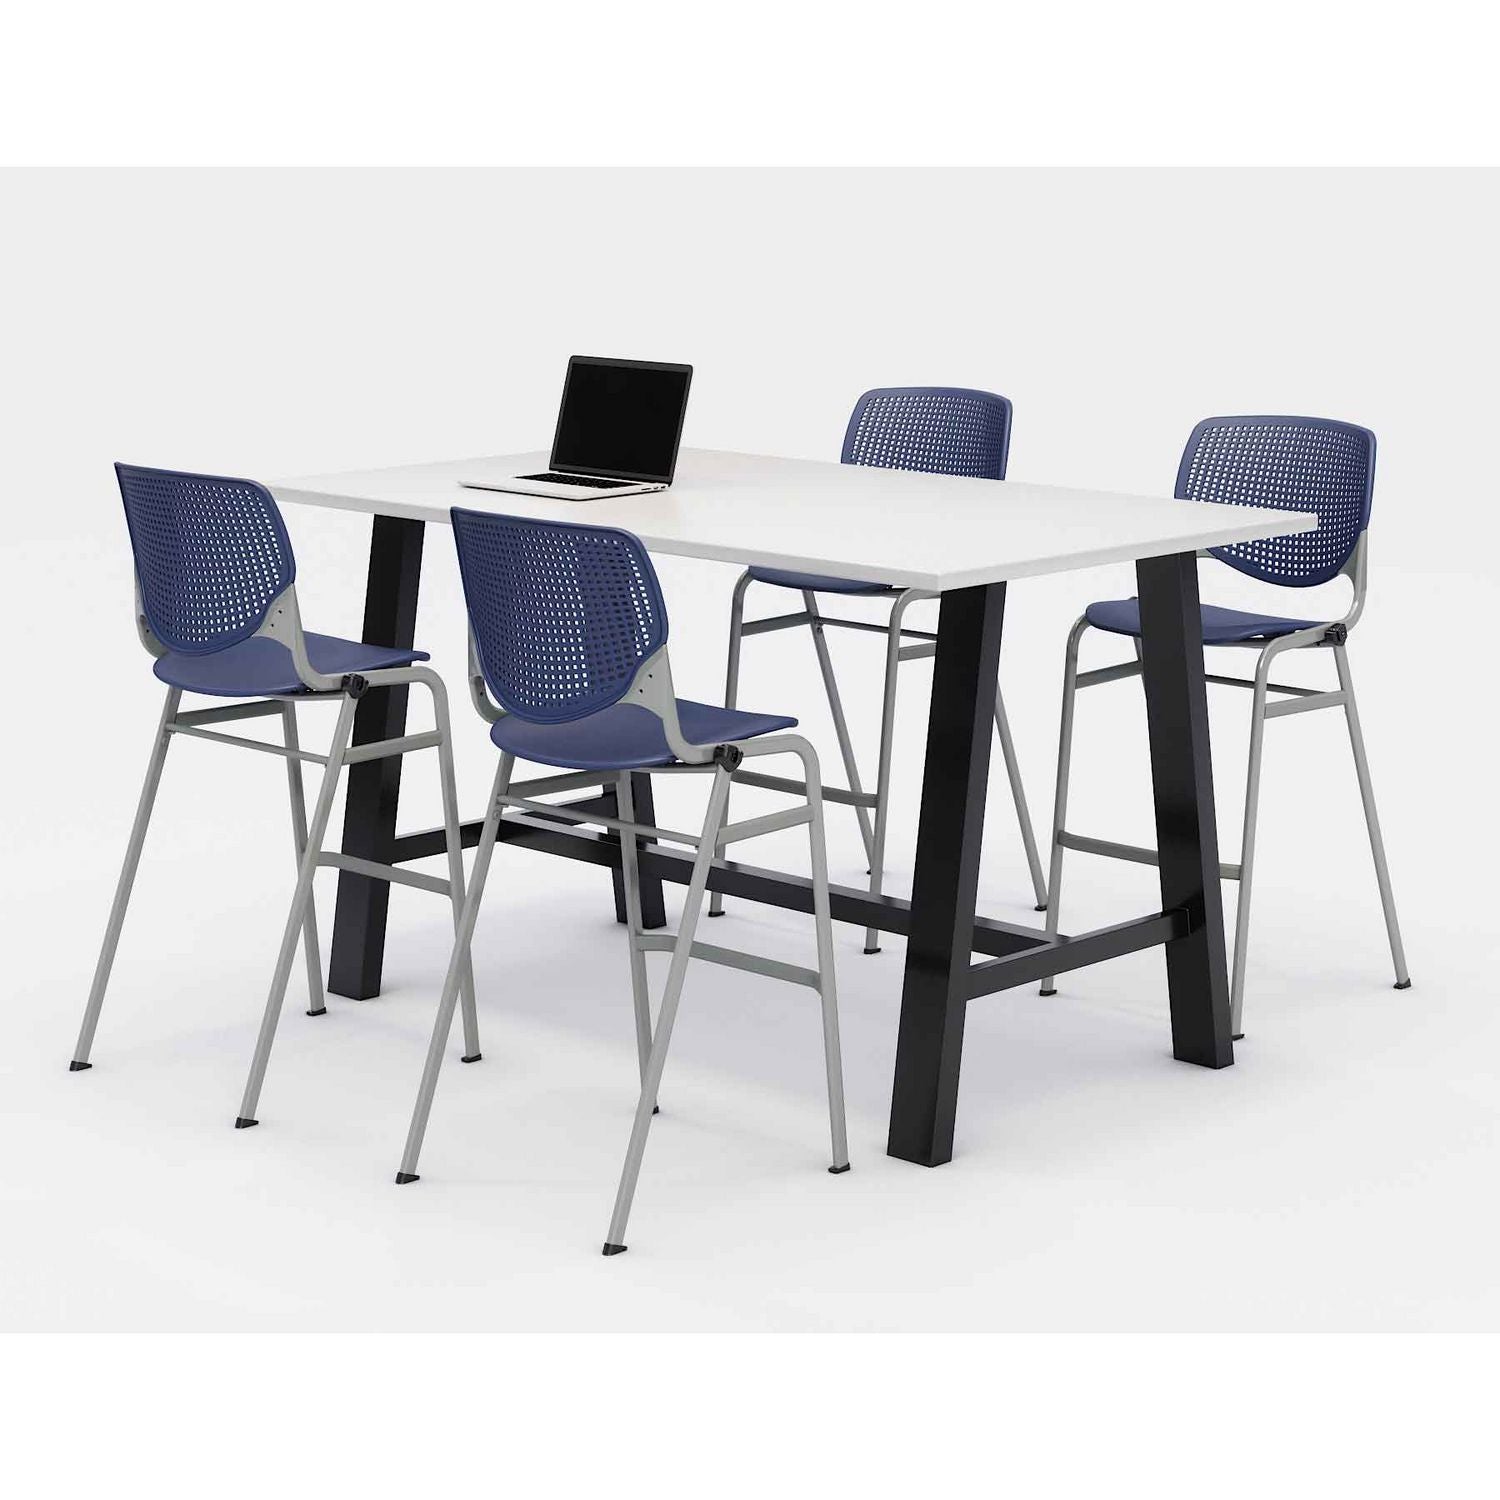 midtown-bistro-dining-table-with-four-navy-kool-barstools-36-x-72-x-41-designer-white-ships-in-4-6-business-days_kfi840031900548 - 1